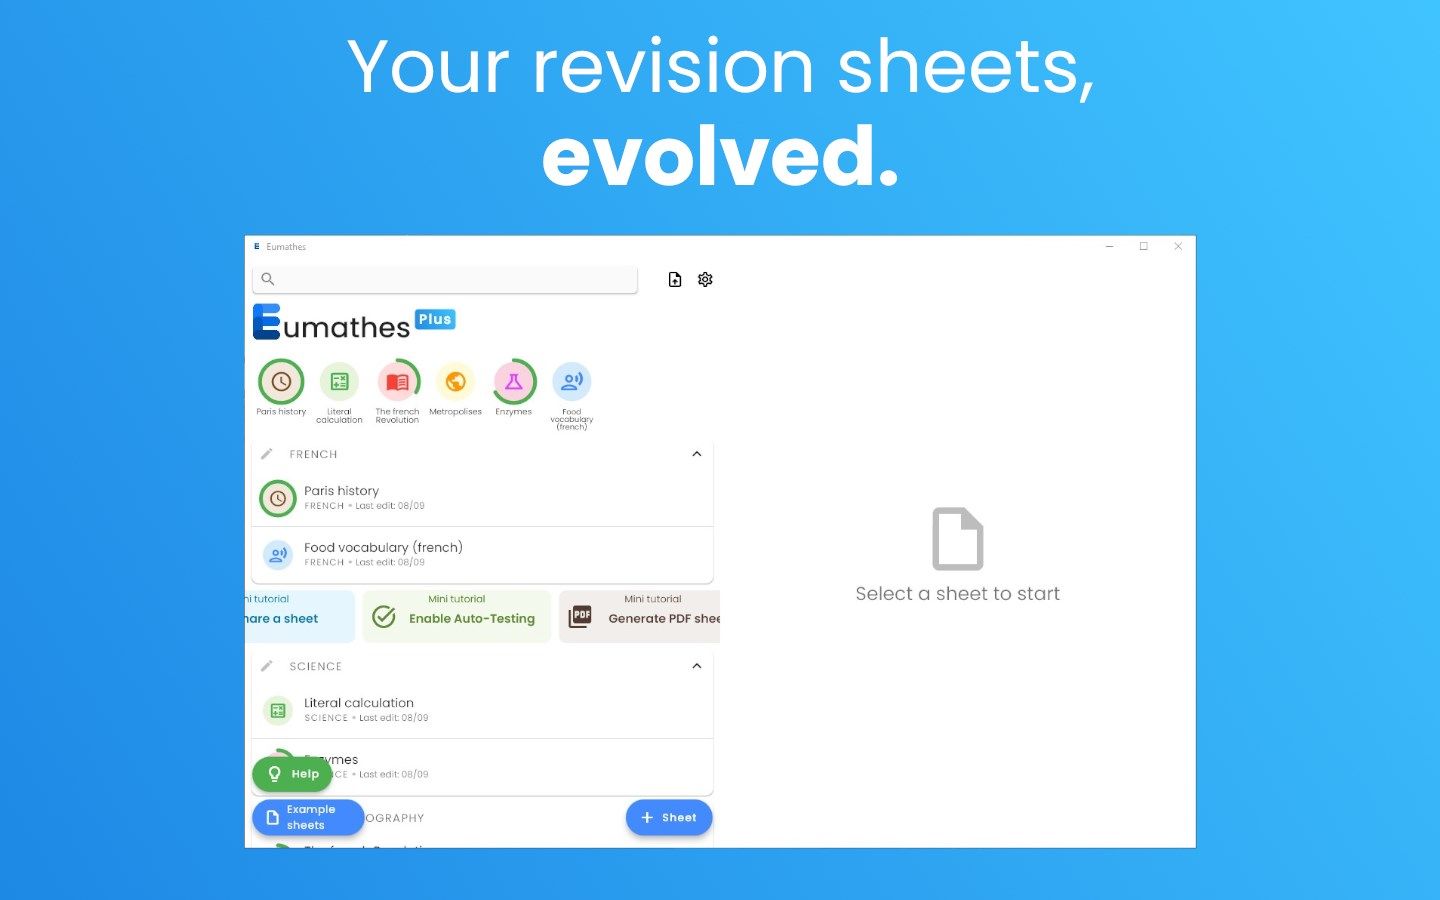 Your revision sheets, evolved.